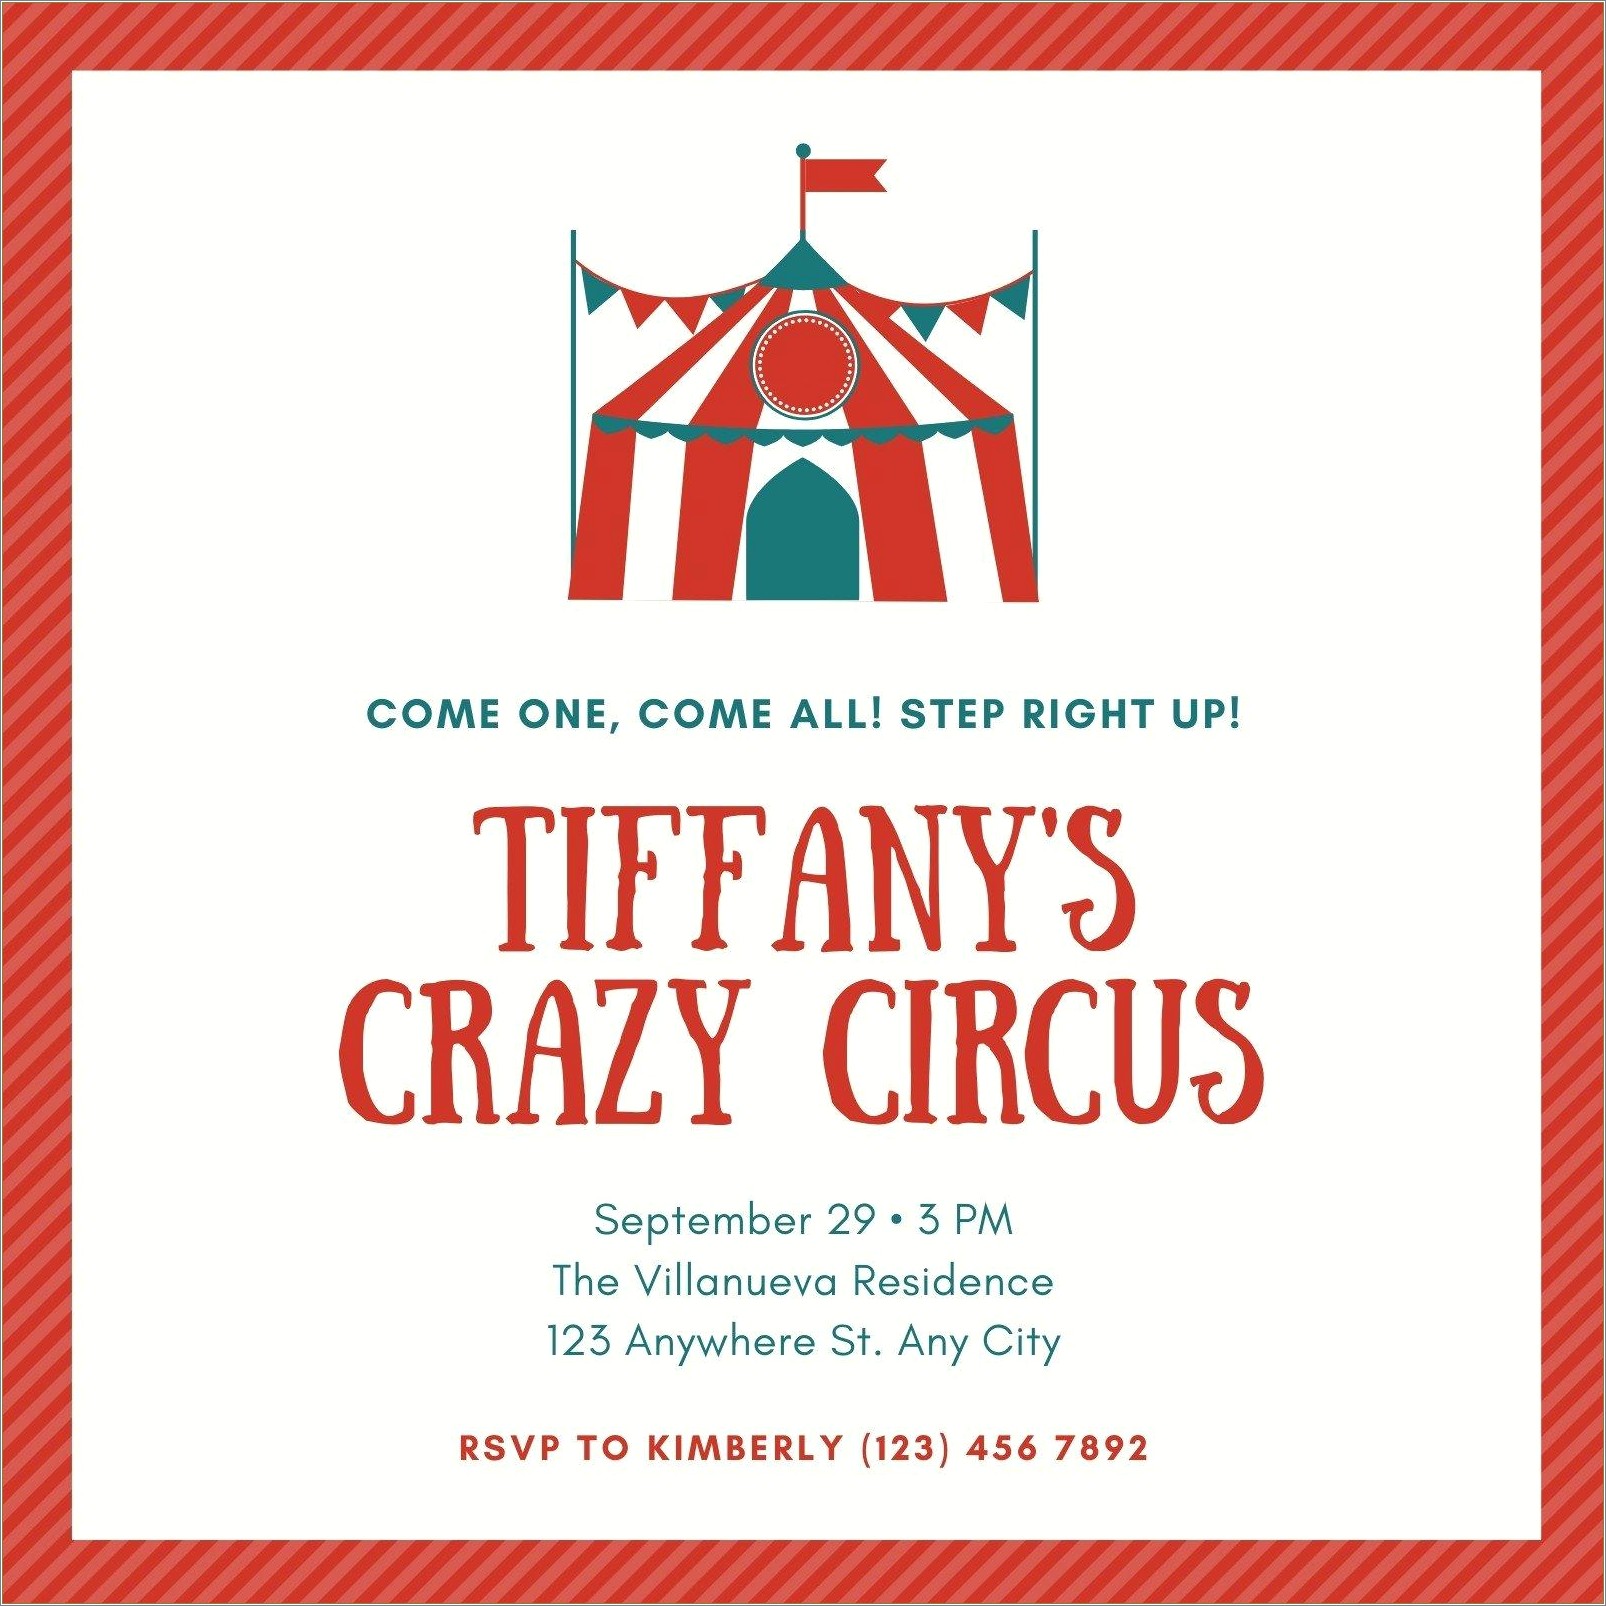 Circus Party Invitation Template Free Download